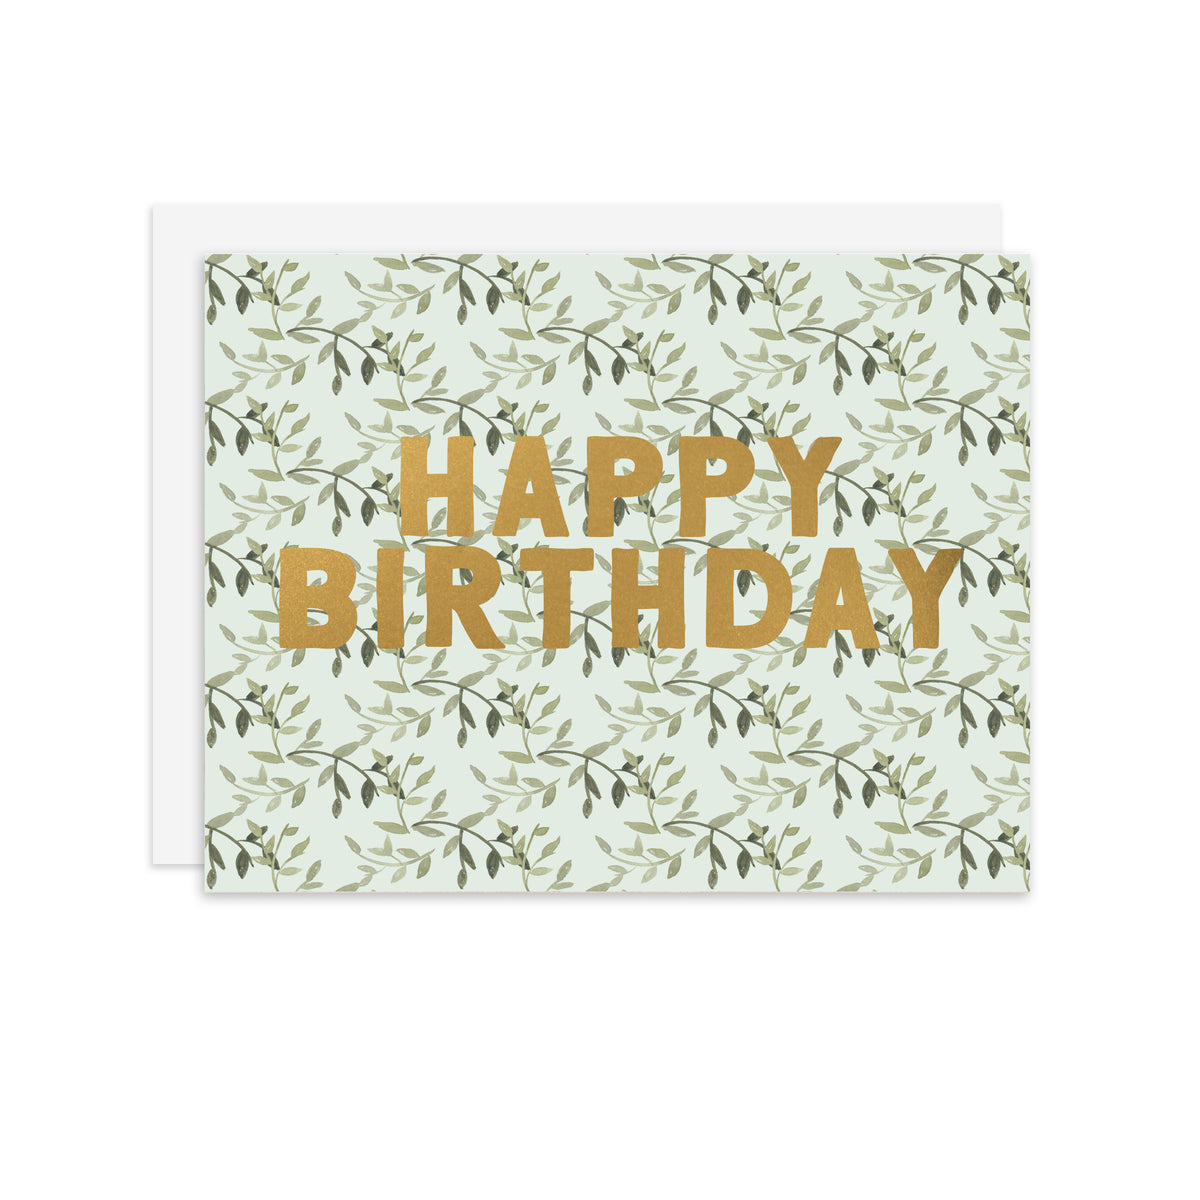 Happy Birthday Leaves - A2 notecard